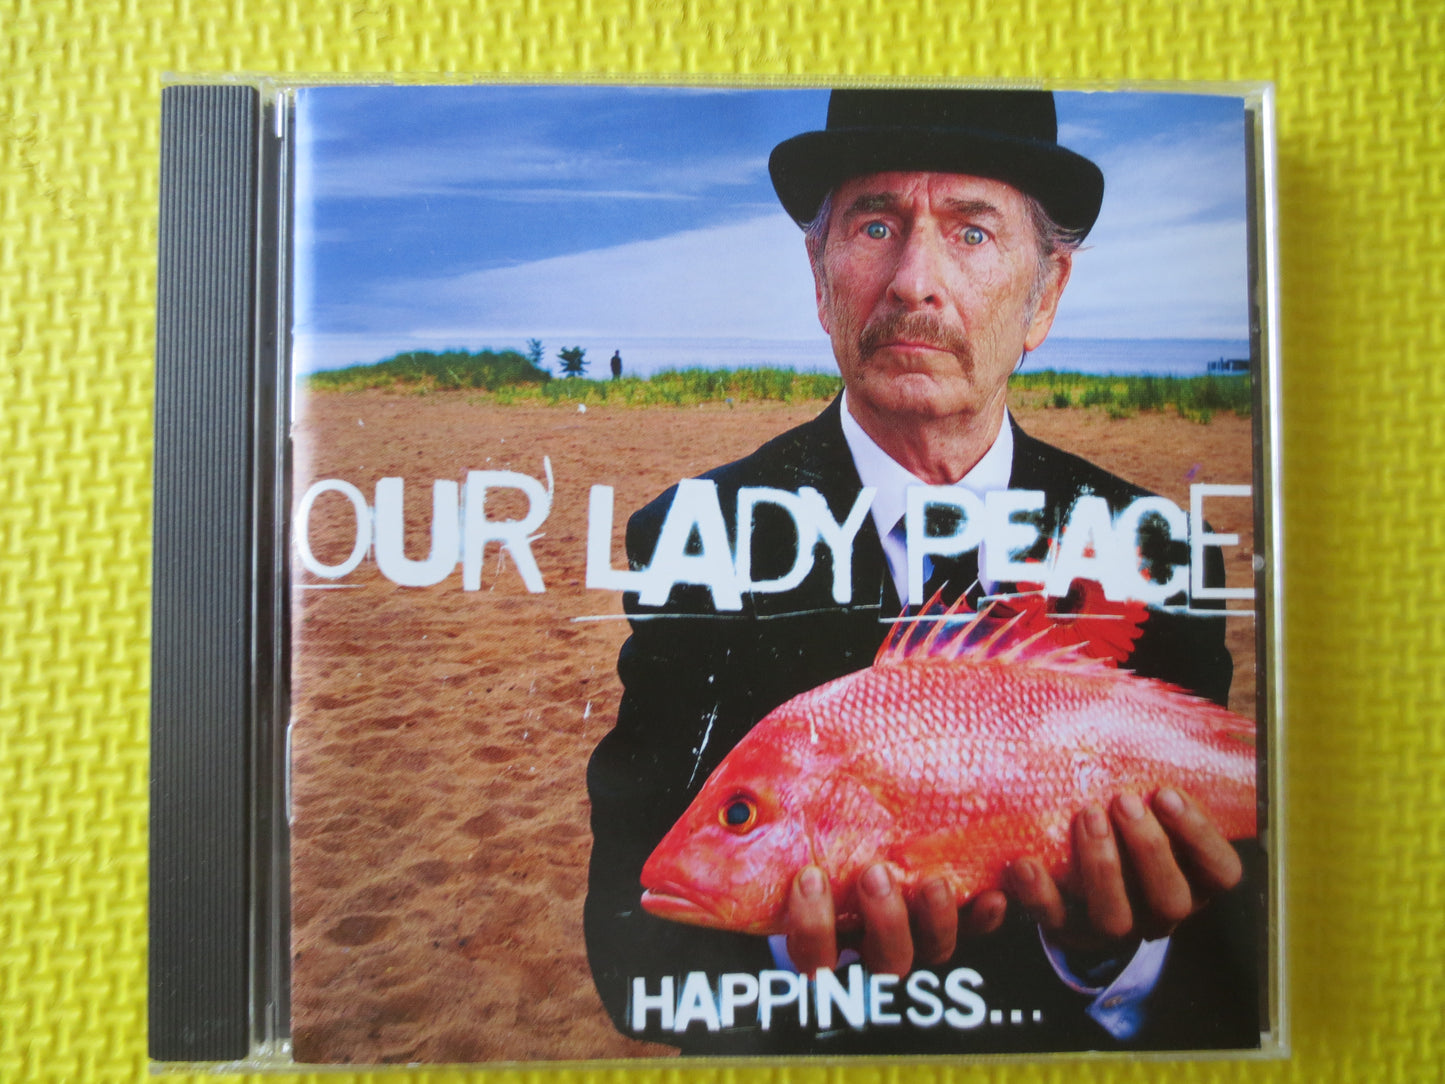 OUR LADY PEACE, Happiness, Our Lady Peace Cd, Our Lady Peace Album, Music Cds, Rock Music cd, Rock Cd, Cds, 1999 Compact Disc